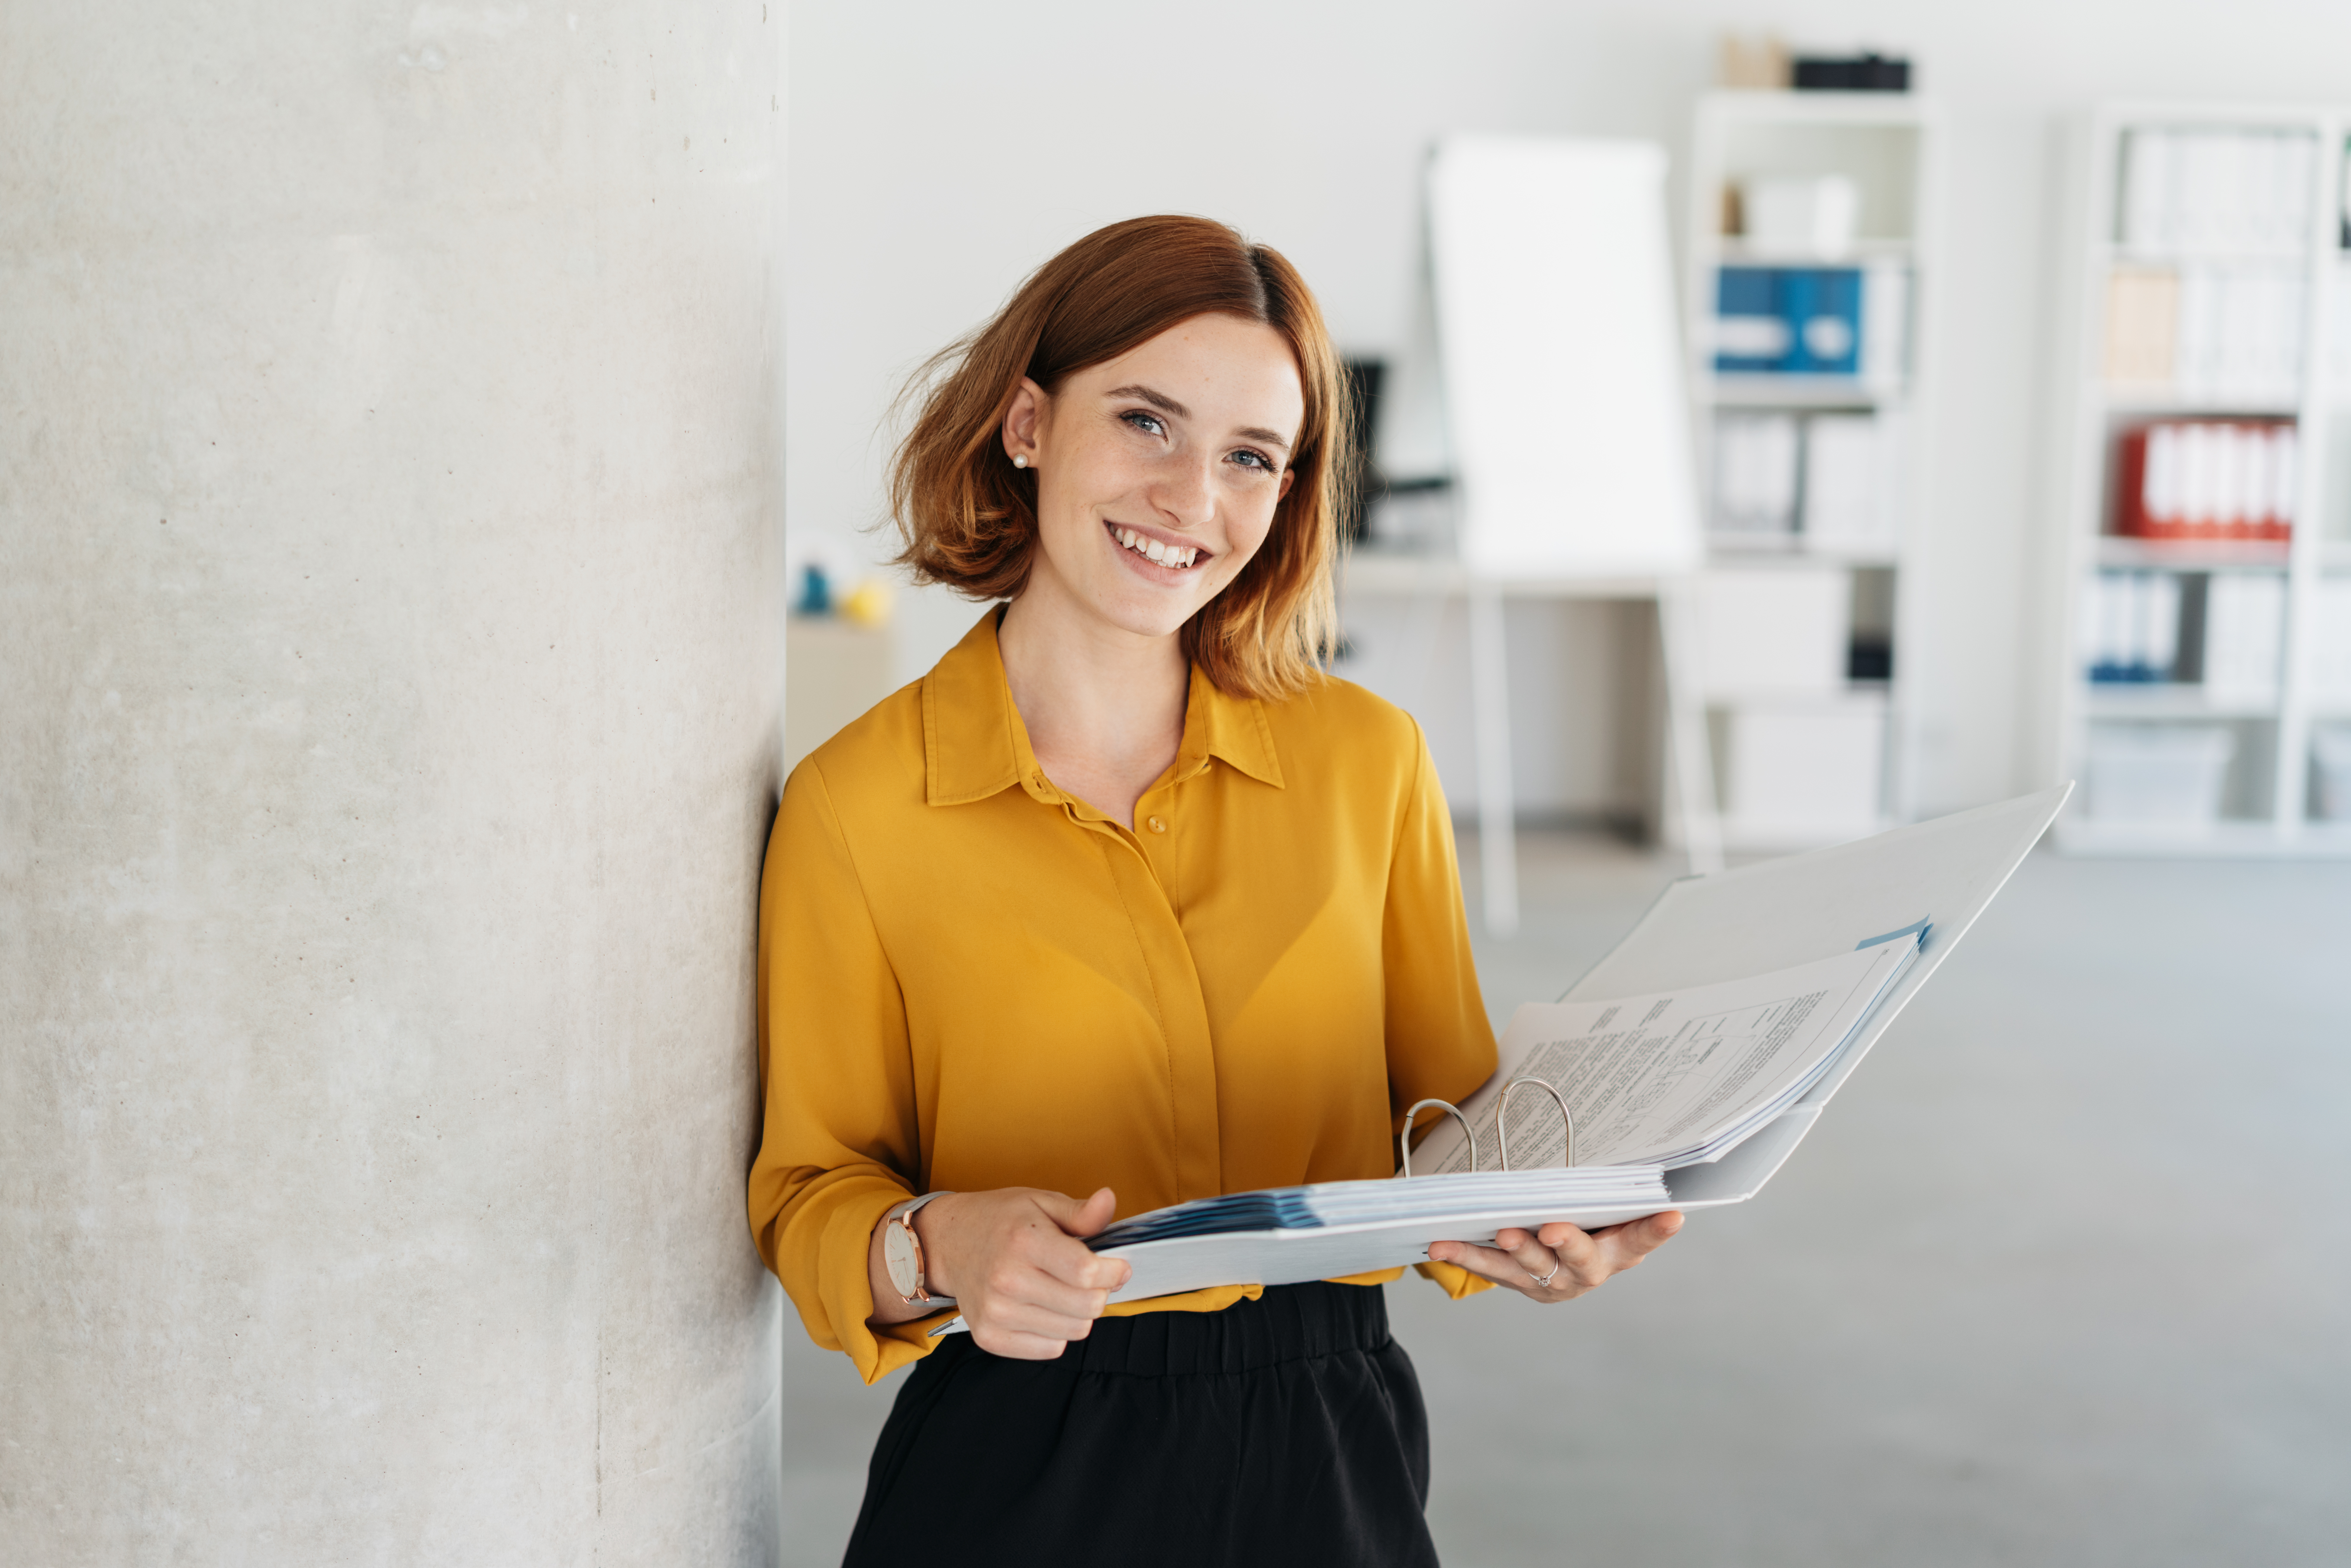 Office worker holding a large open binder as she looks at the camera with a sweet friendly smile